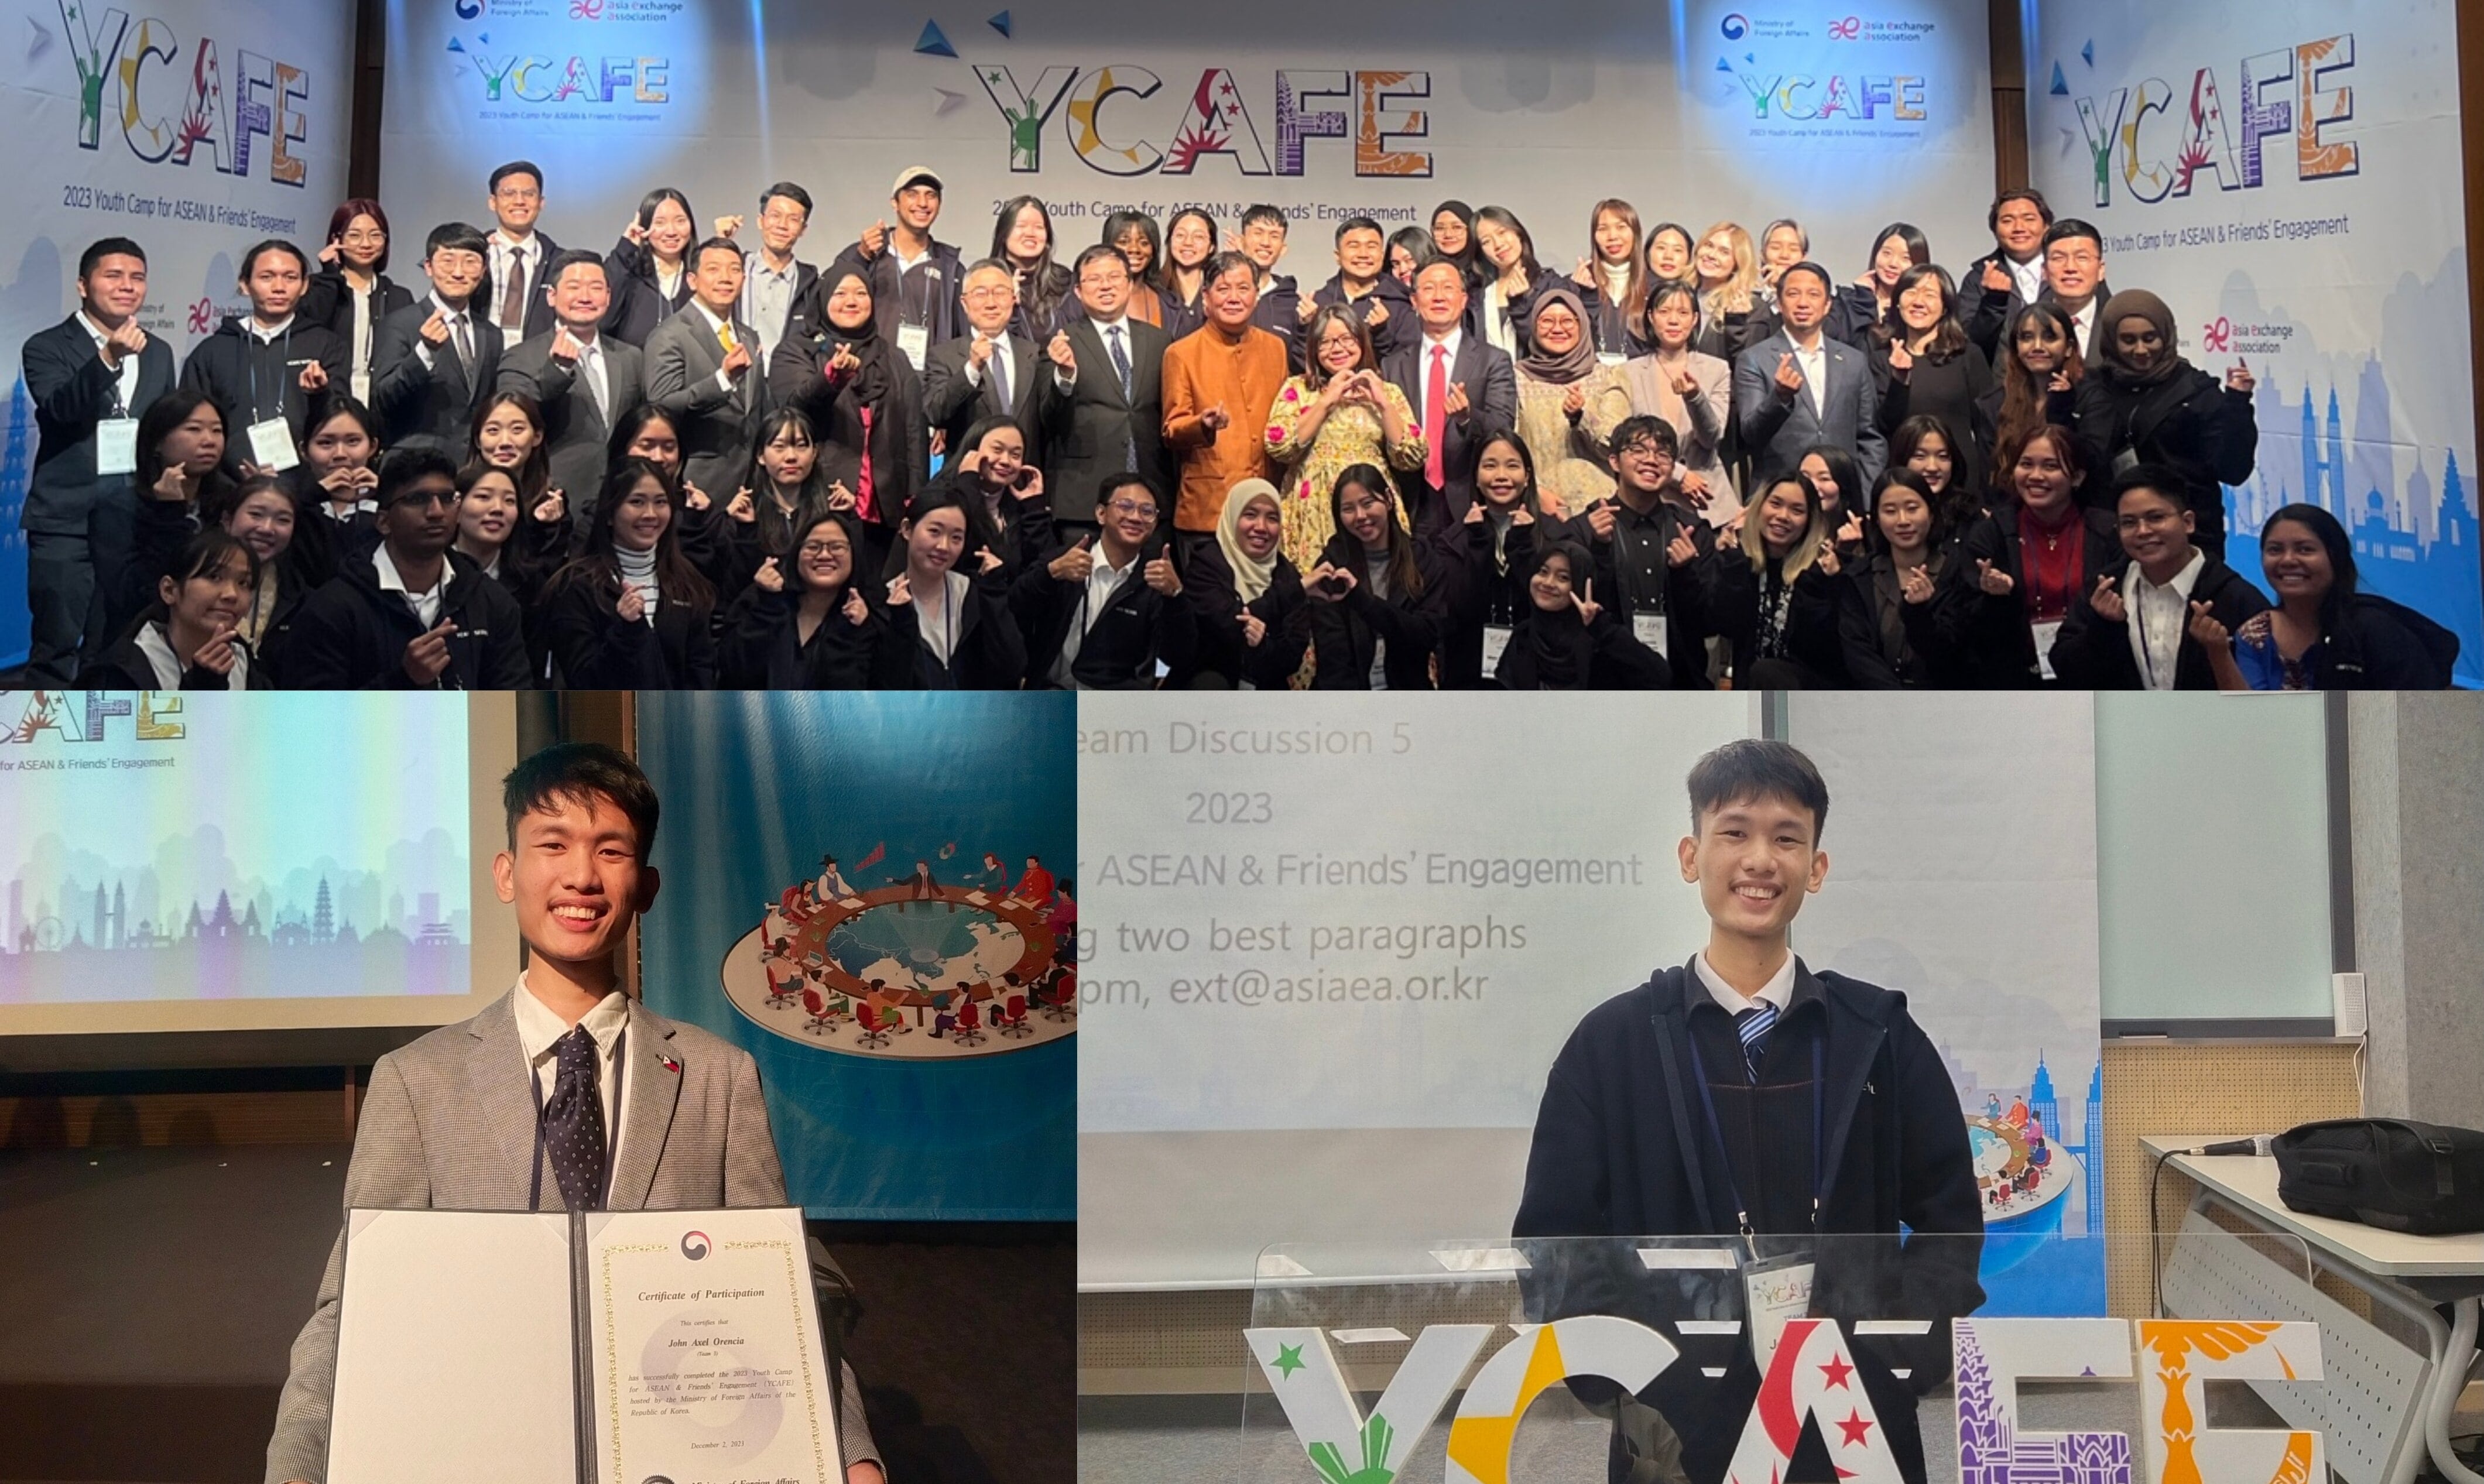 Camp in Seoul stimulates int'l youth connections, leadership